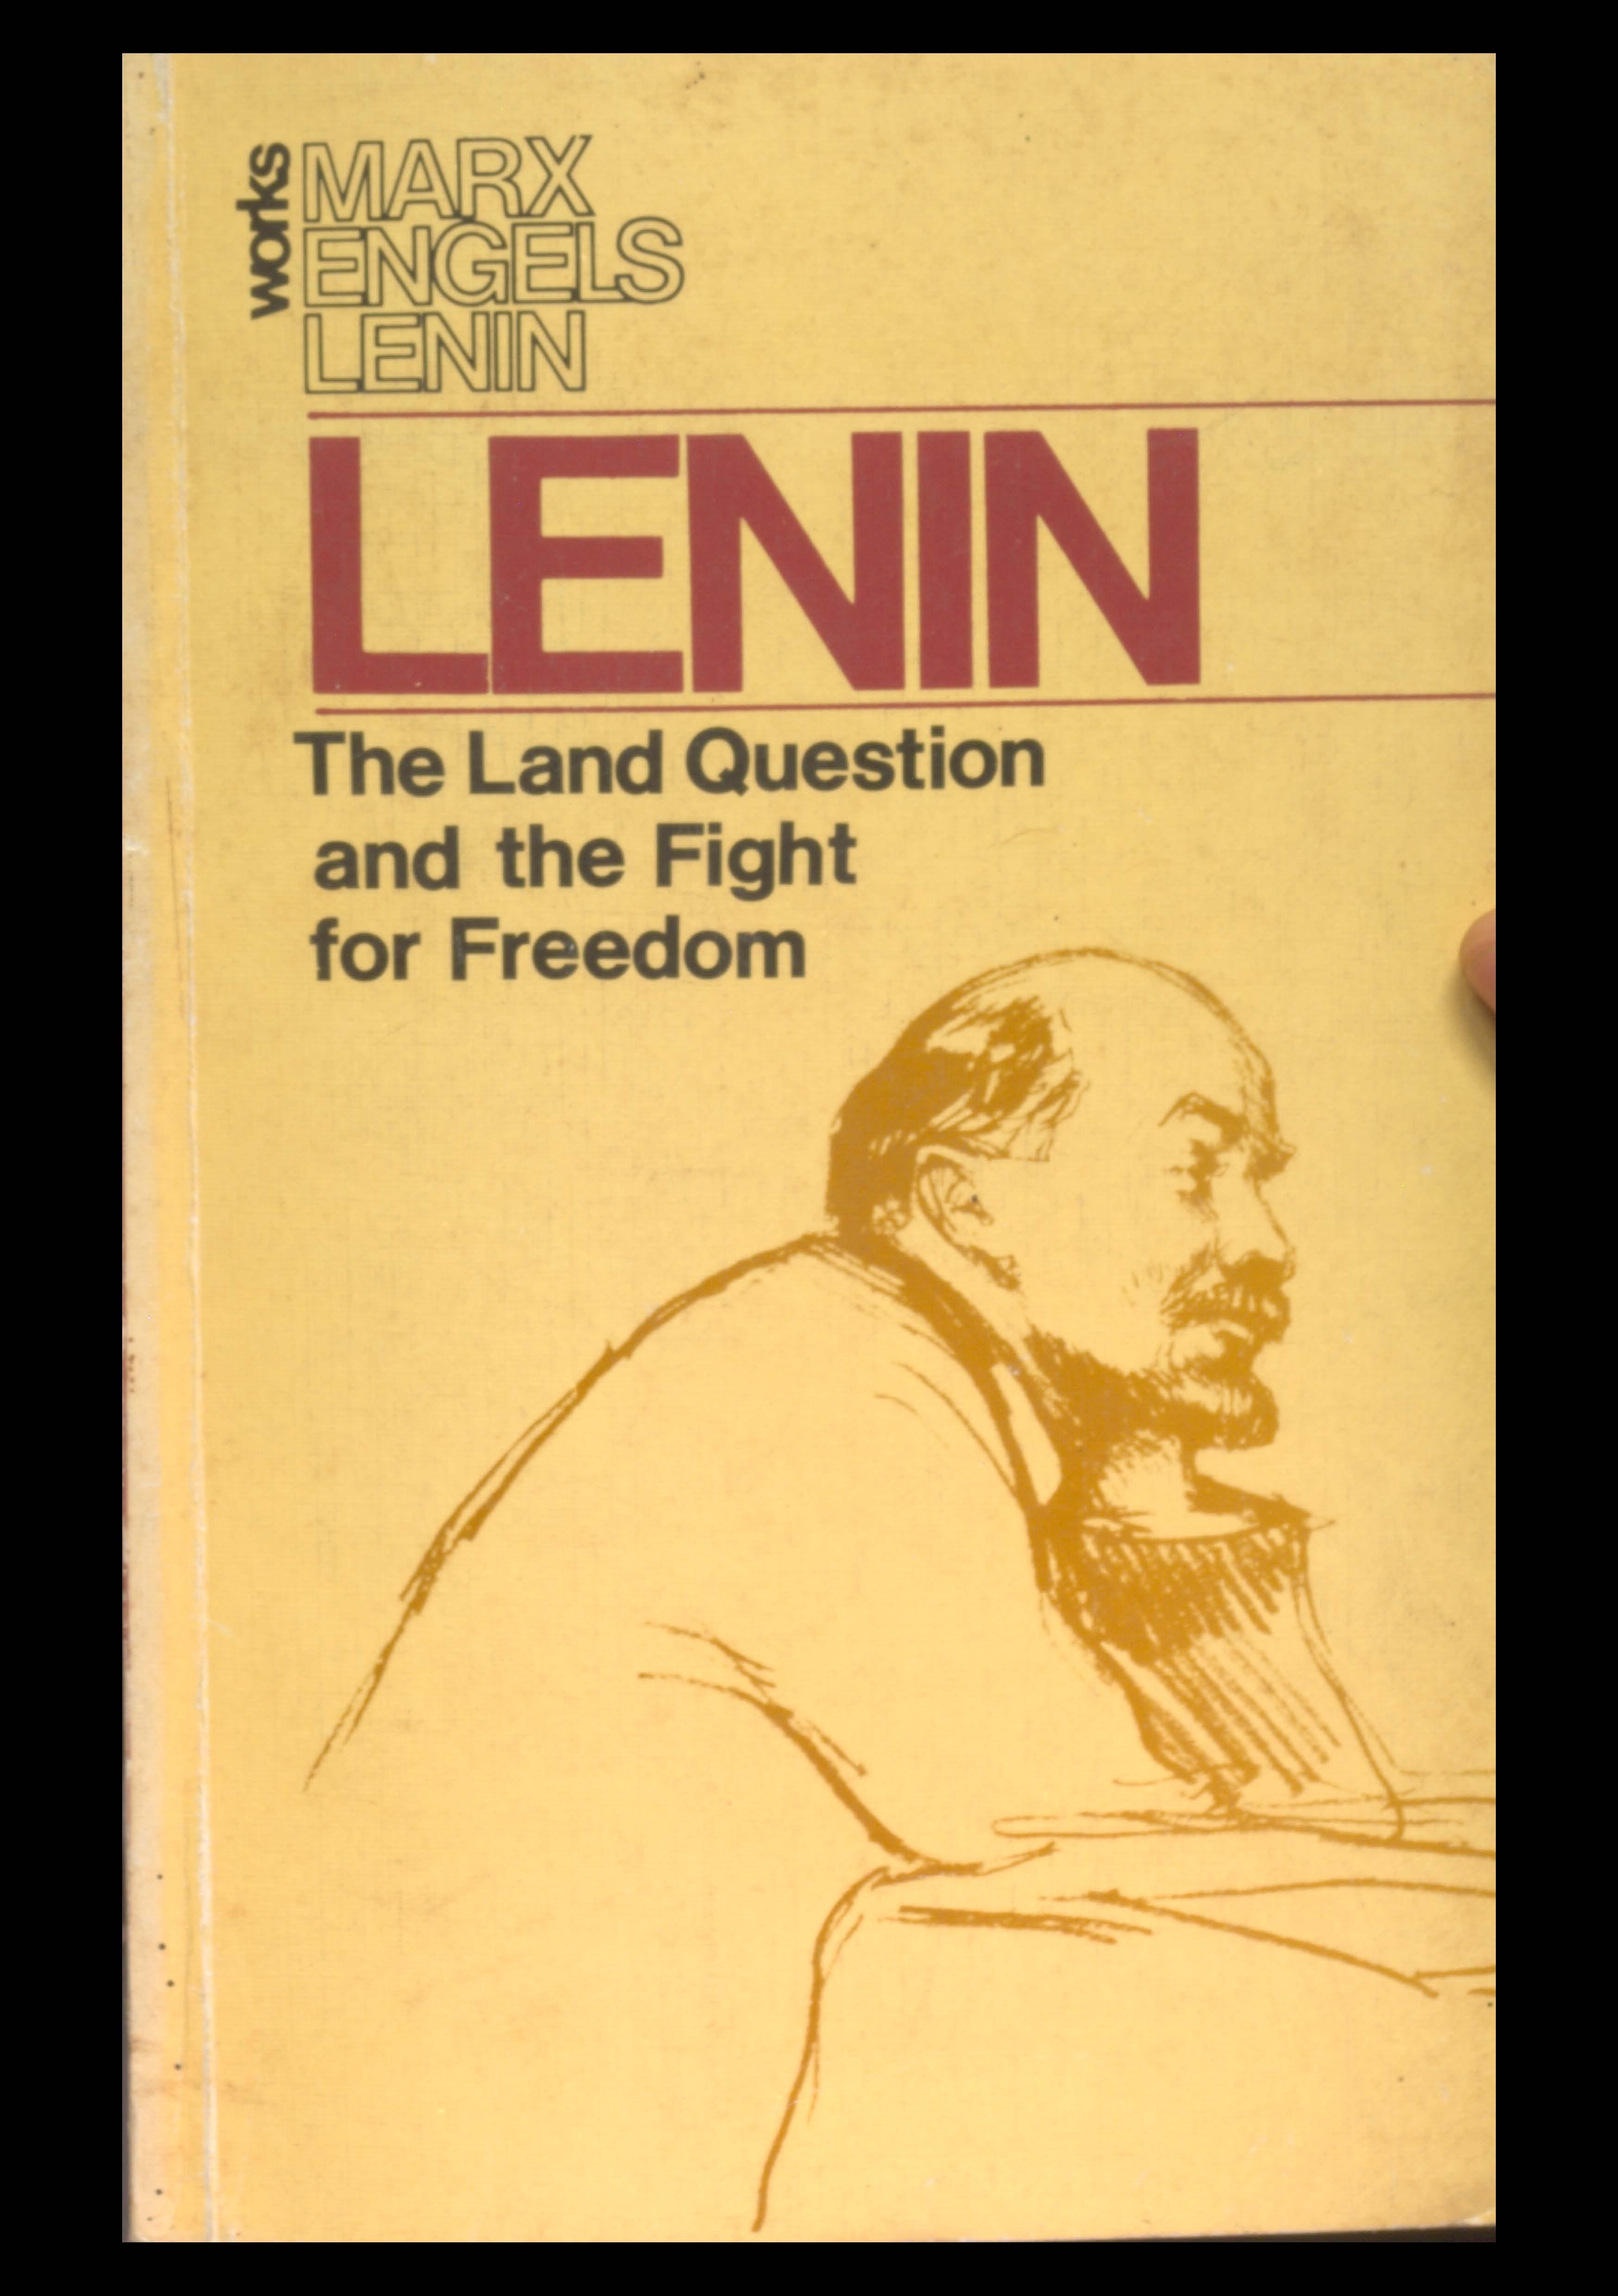 Lenin The Land Question and the Fight for Freedom